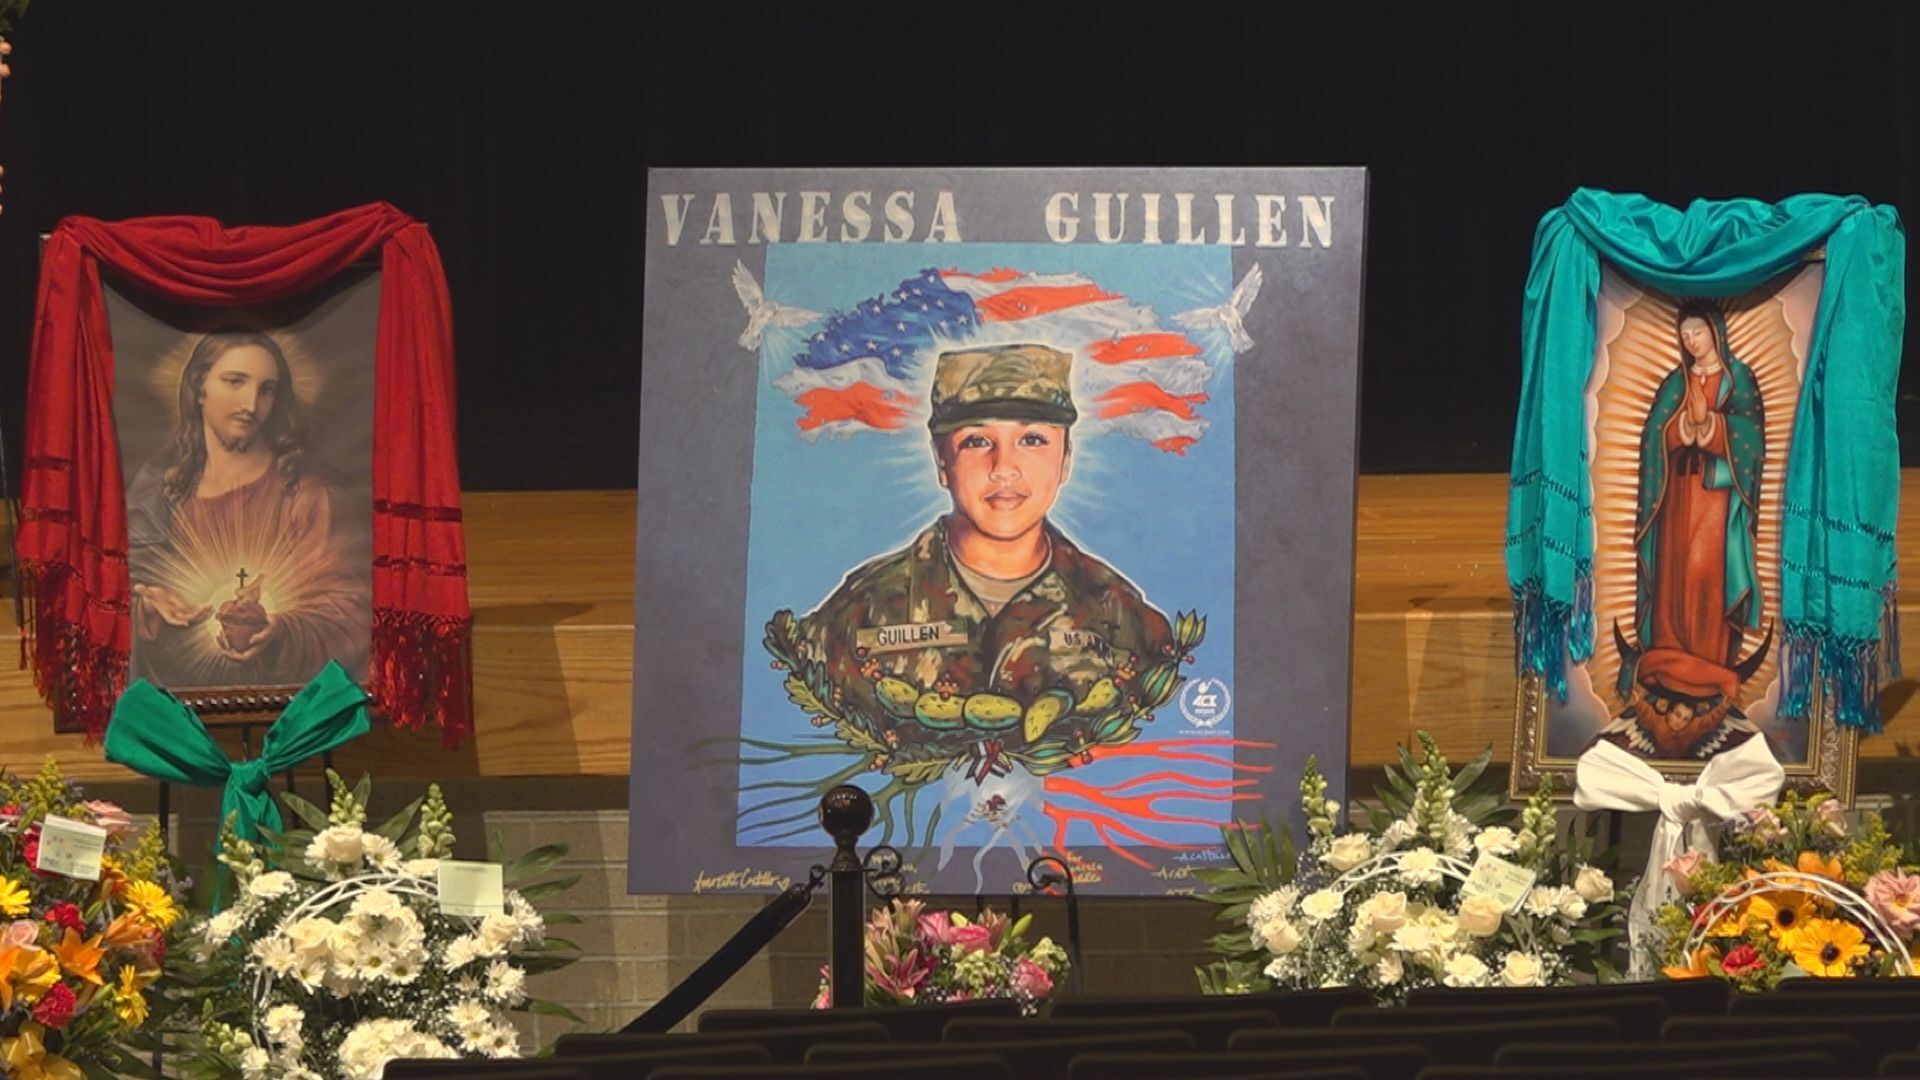 The review was conducted by a five member civilian panel, created in the wake of Vanessa Guillen's death.